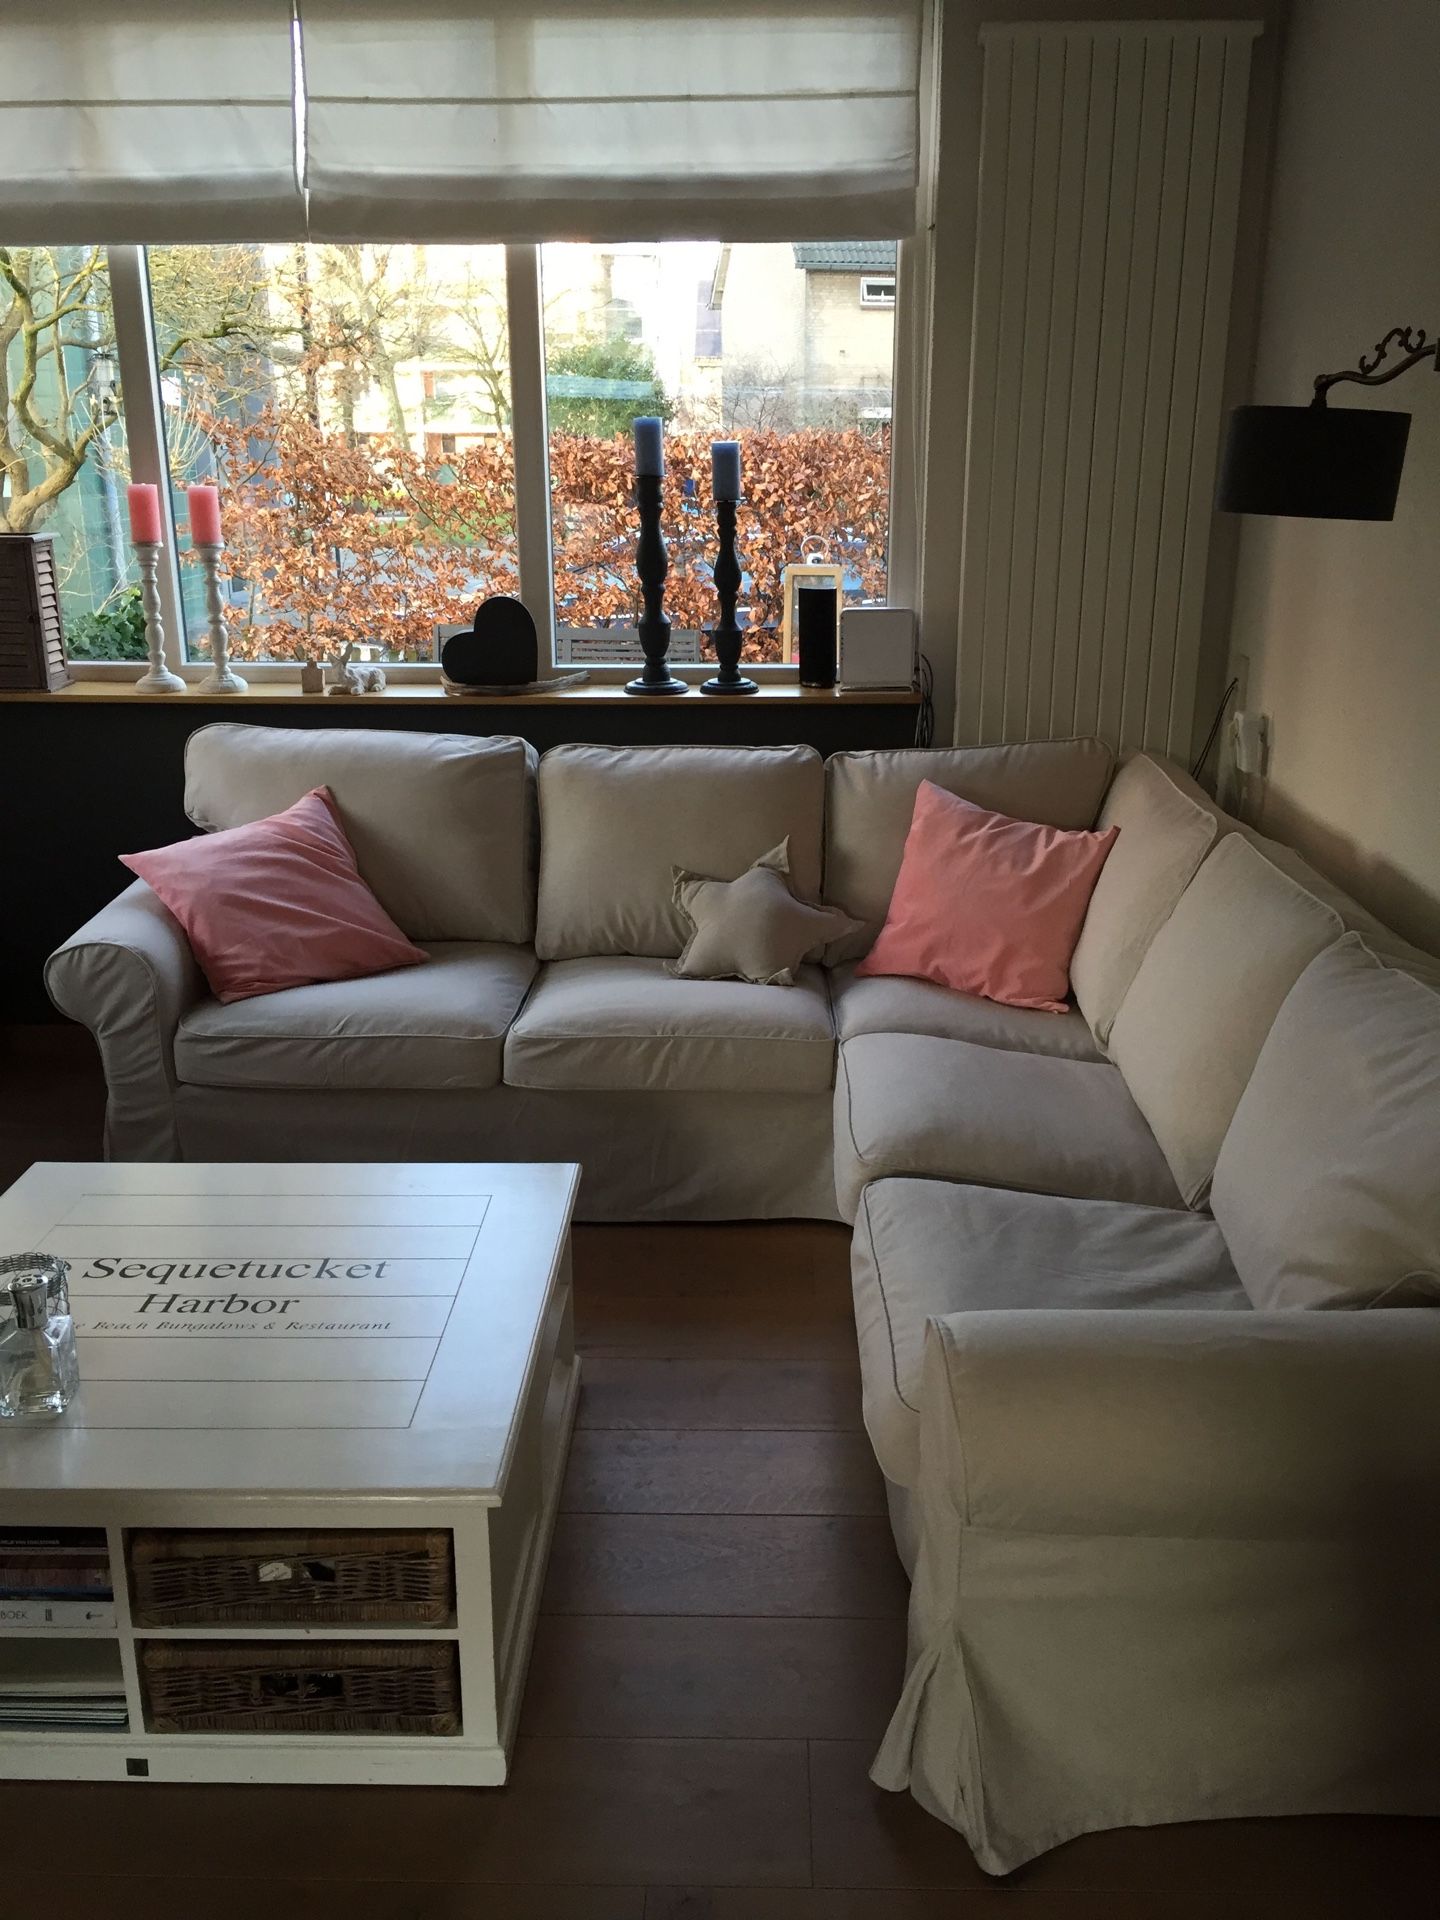 Ikea ektorp sectional with dark beige cover must see!! - Can Deliver